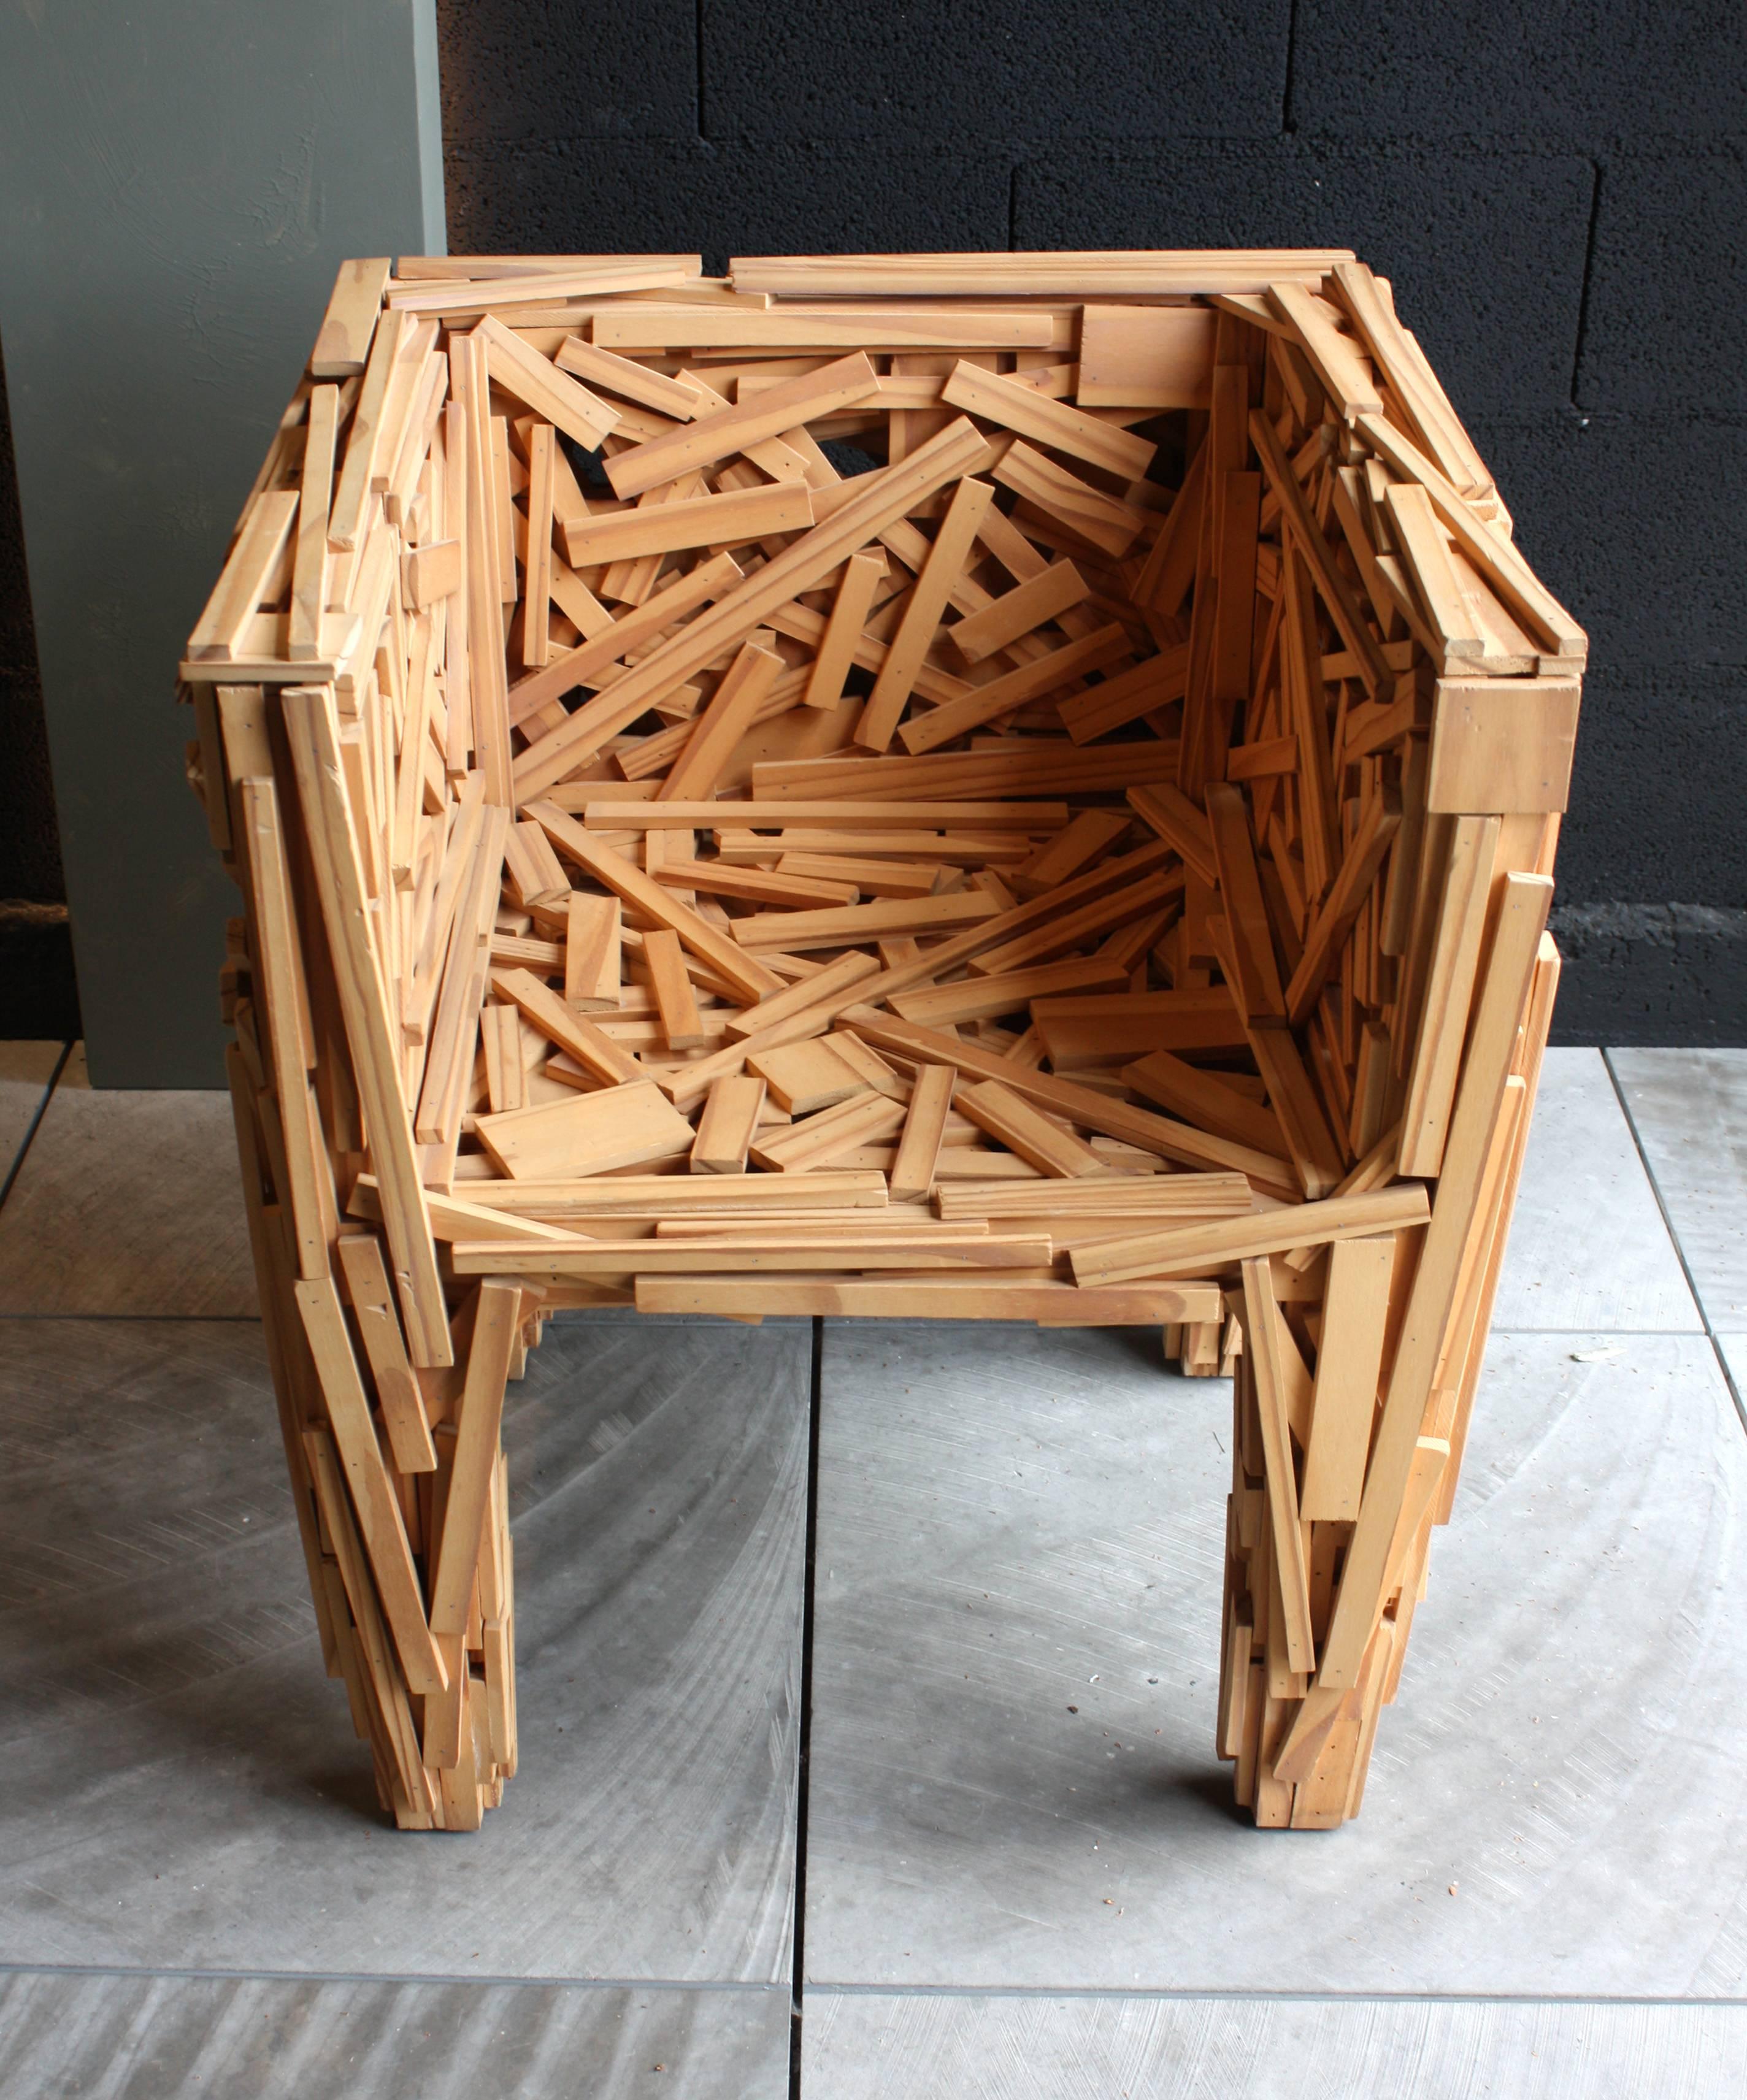 Early Favela armchair designed by Fernando and Humberto Campana for Edra, Italy, 2003. Sculptural chair without internal structure, built with pieces of natural Brazilian Pinus wood, fixed by hand in a deliberately random. Indoor and outdoor